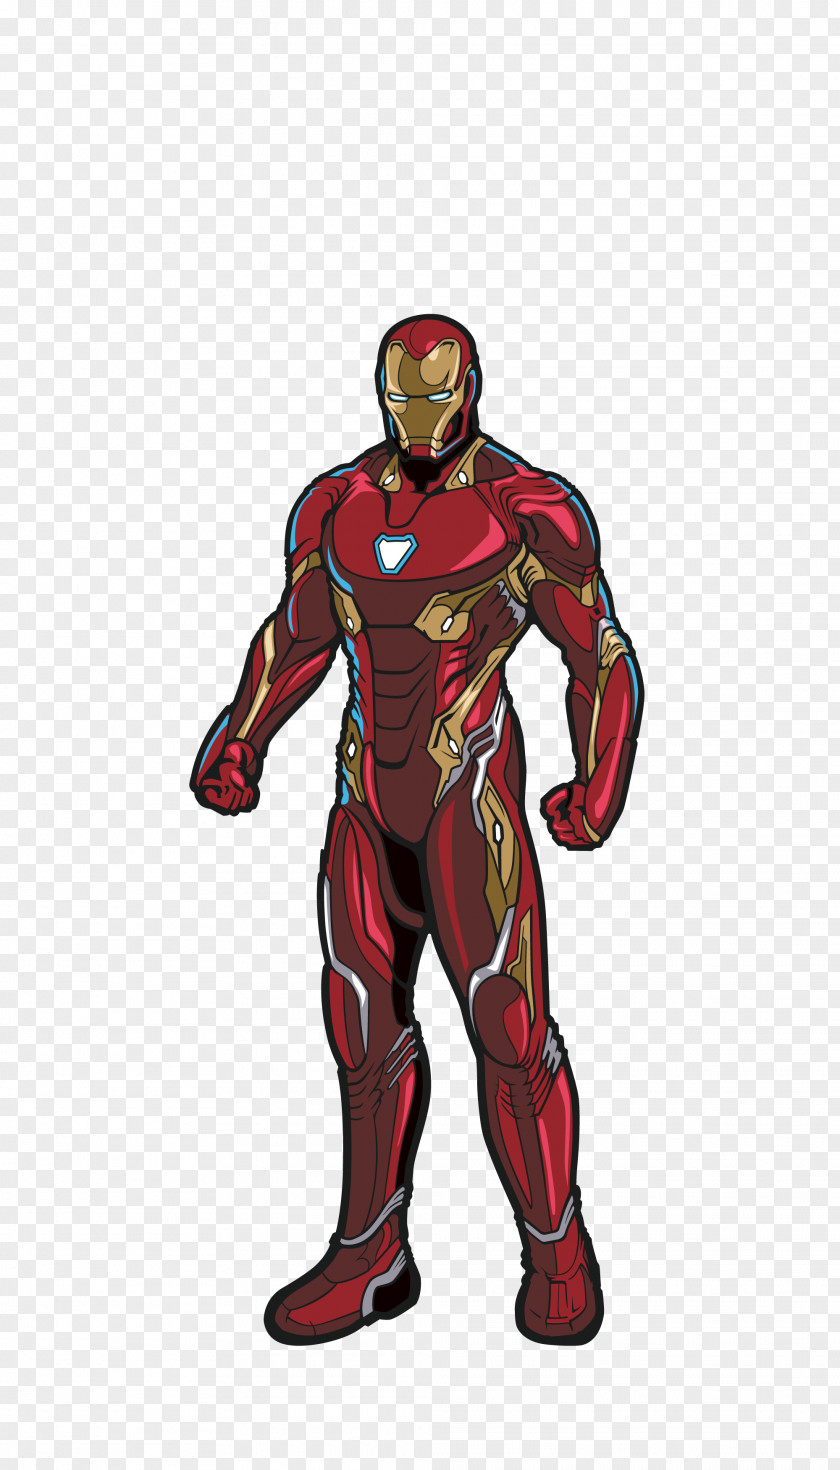 Backer Background Iron Man Spider-Man The Avengers Captain America Black Panther PNG